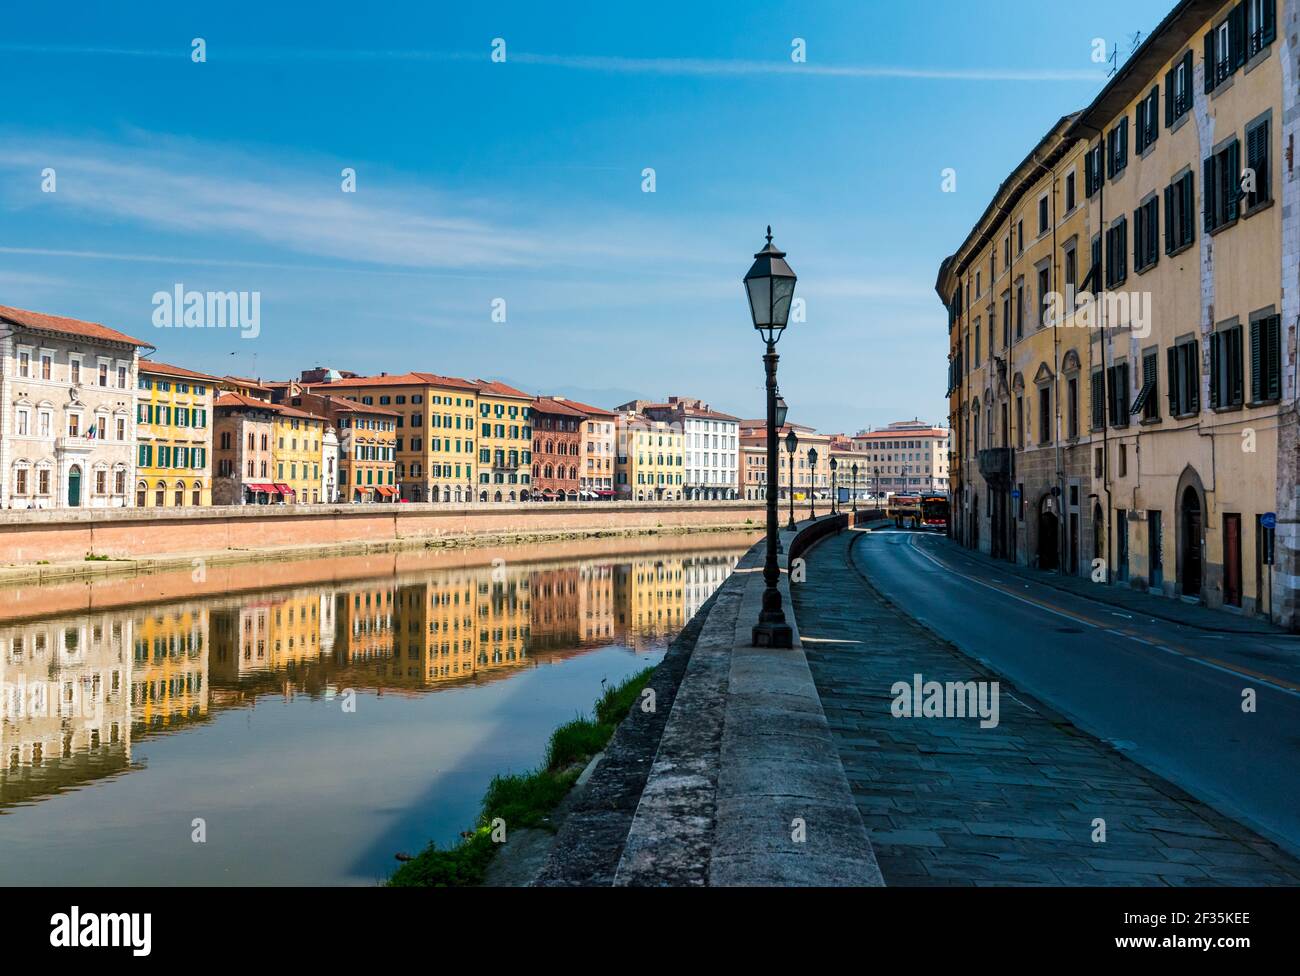 Historic lamp of street light of riverbank of Arno river, Pisa, Italy. Row of buildings reflected on water surface. Stock Photo